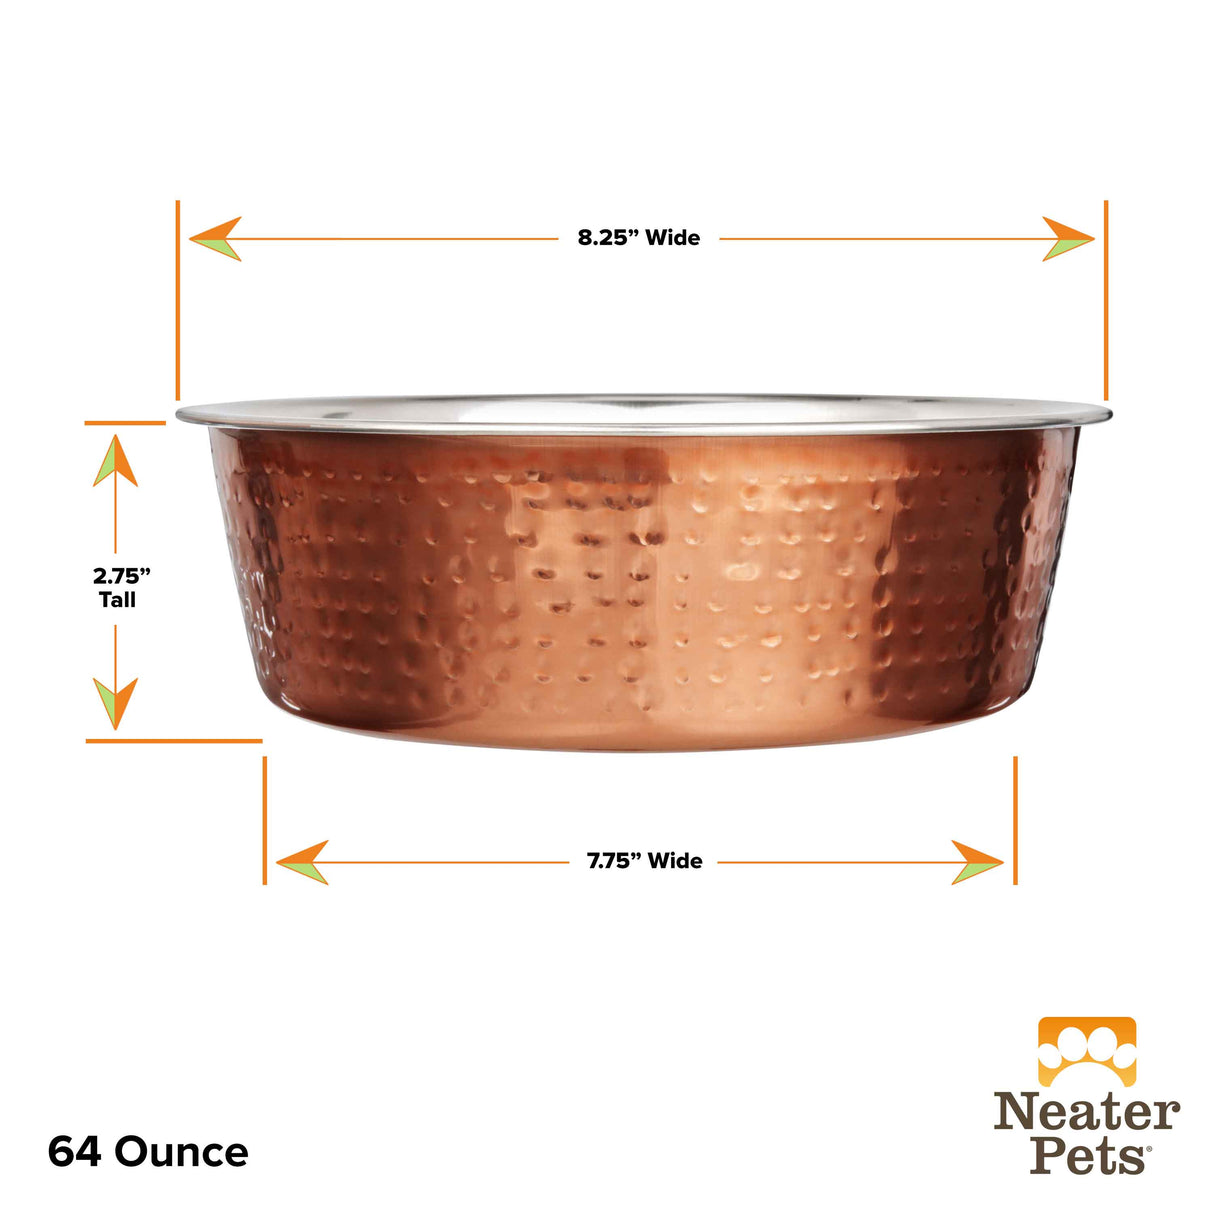 Dimensions of the 64 ounce Hammered Copper Finish Bowl